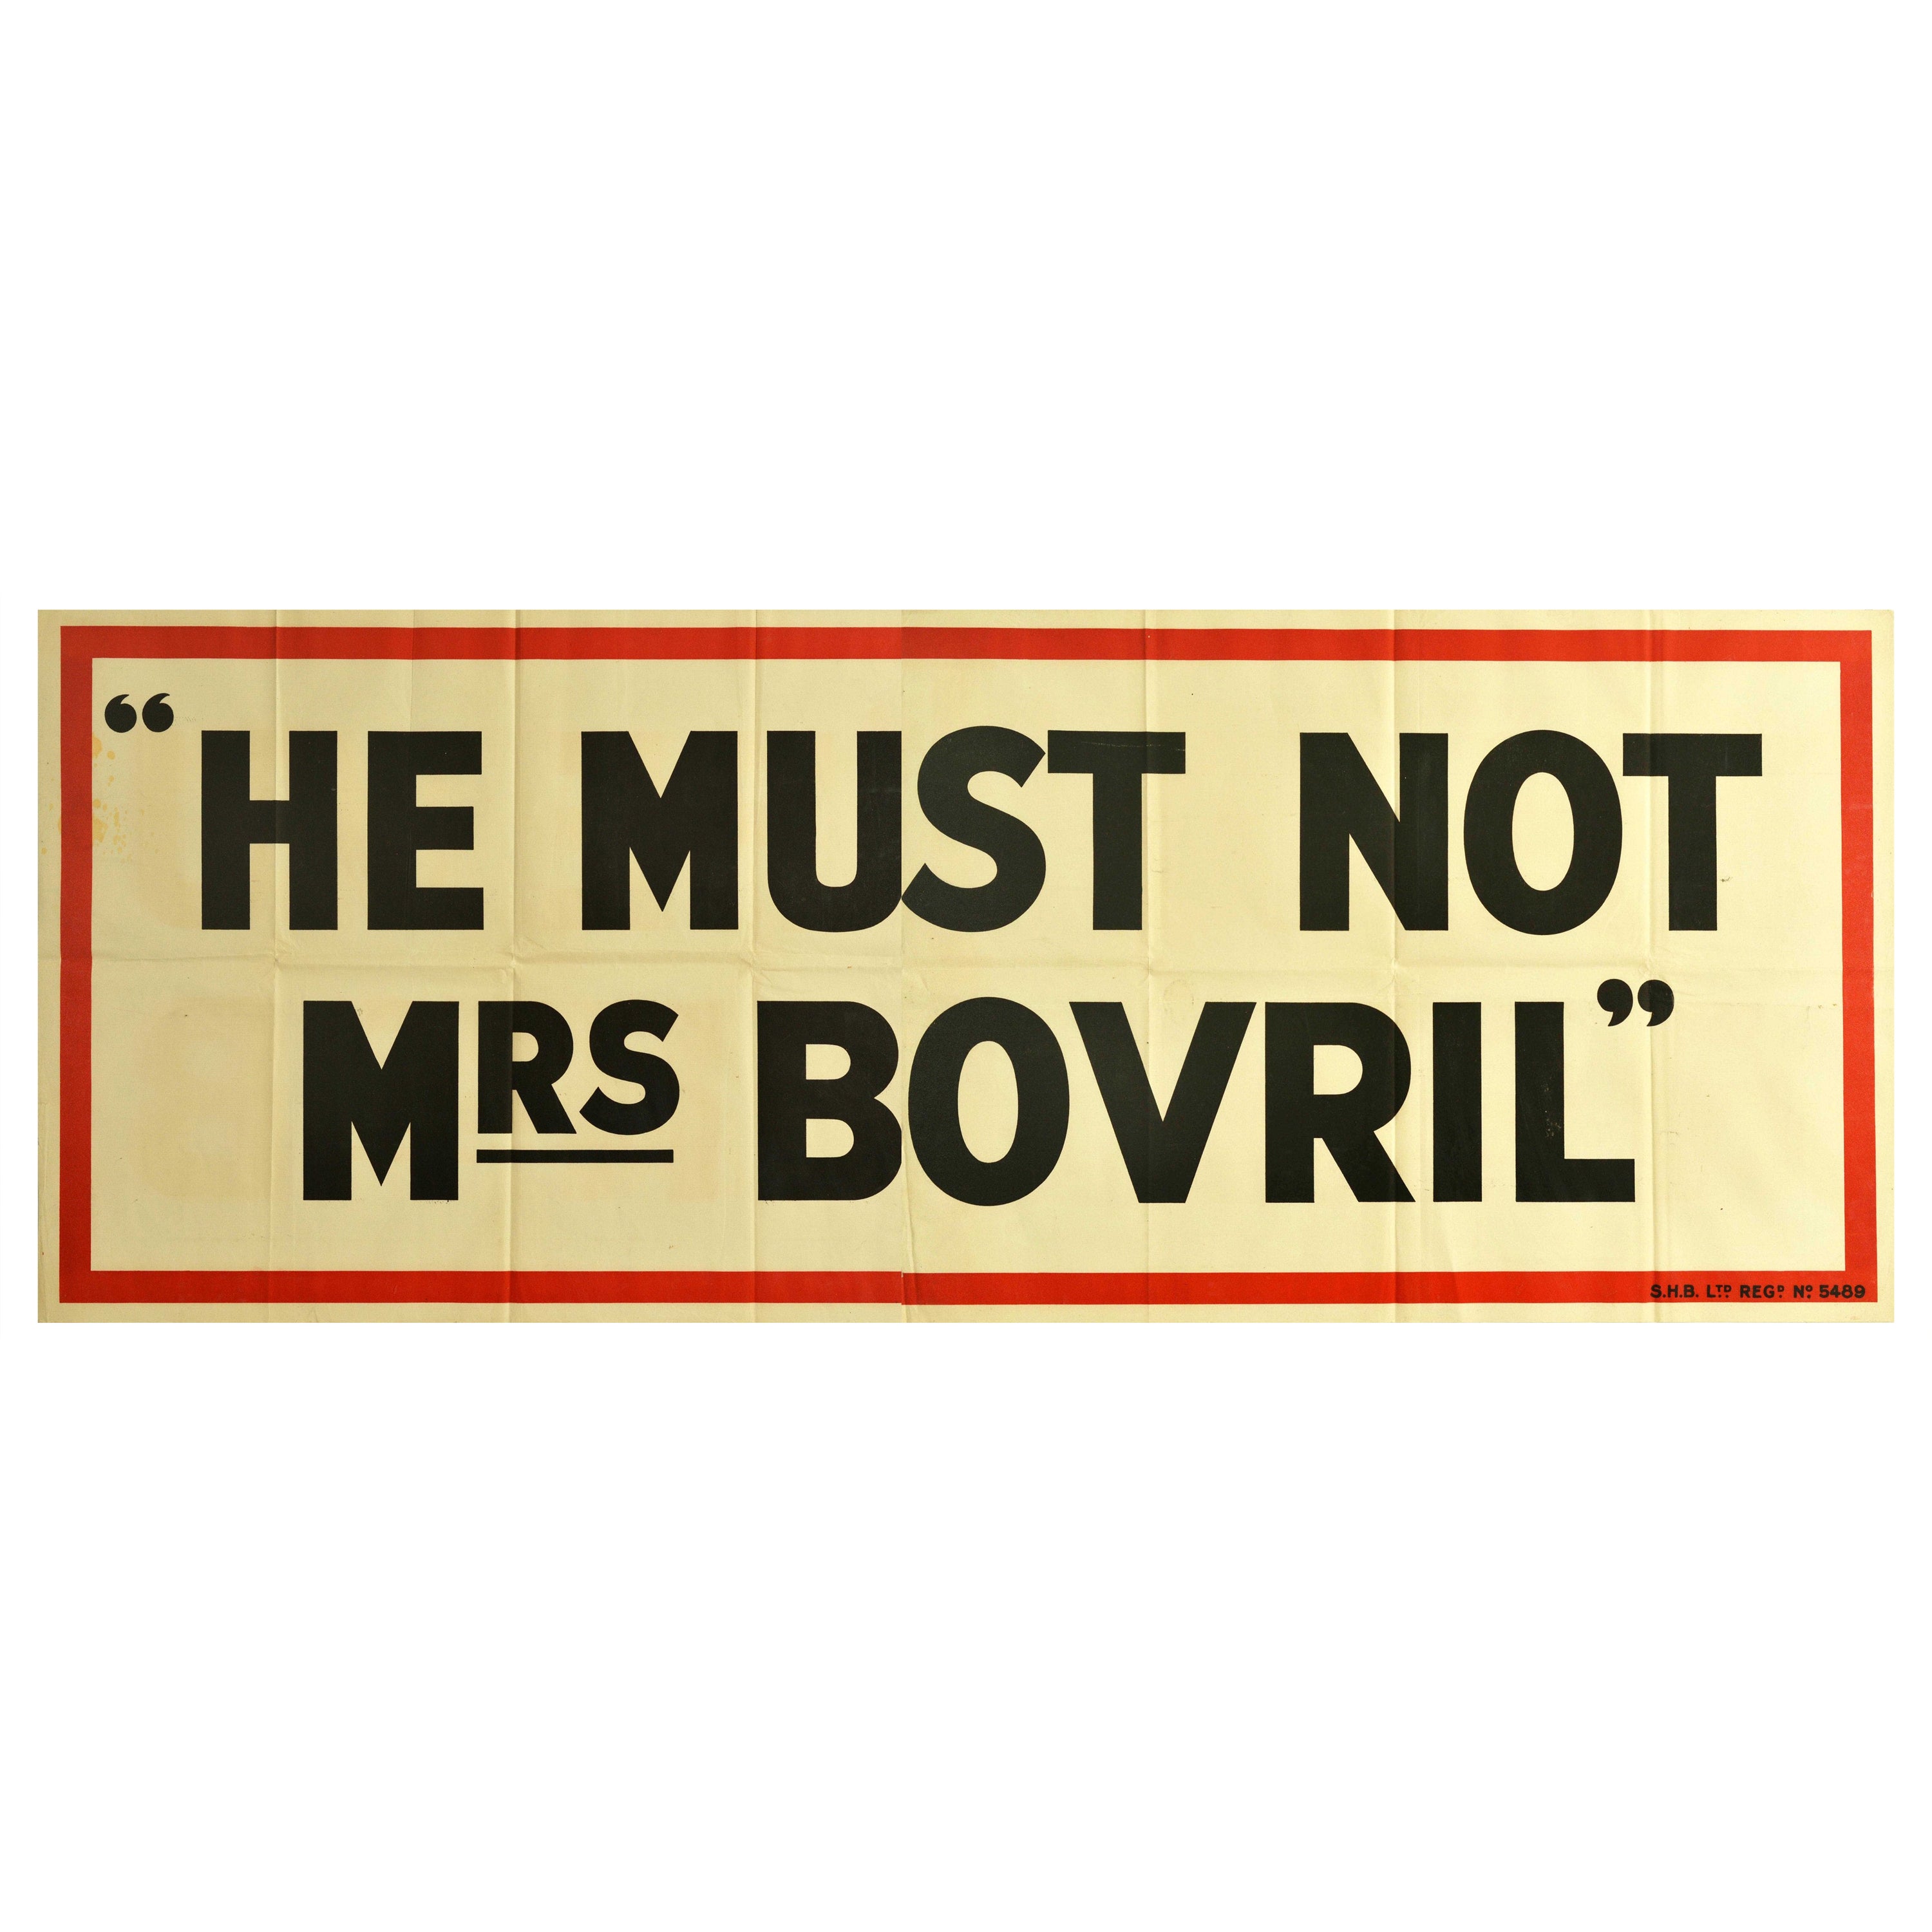 Original Vintage Poster He Must Not Mrs Bovril Word Play Pun Drink Food Campaign